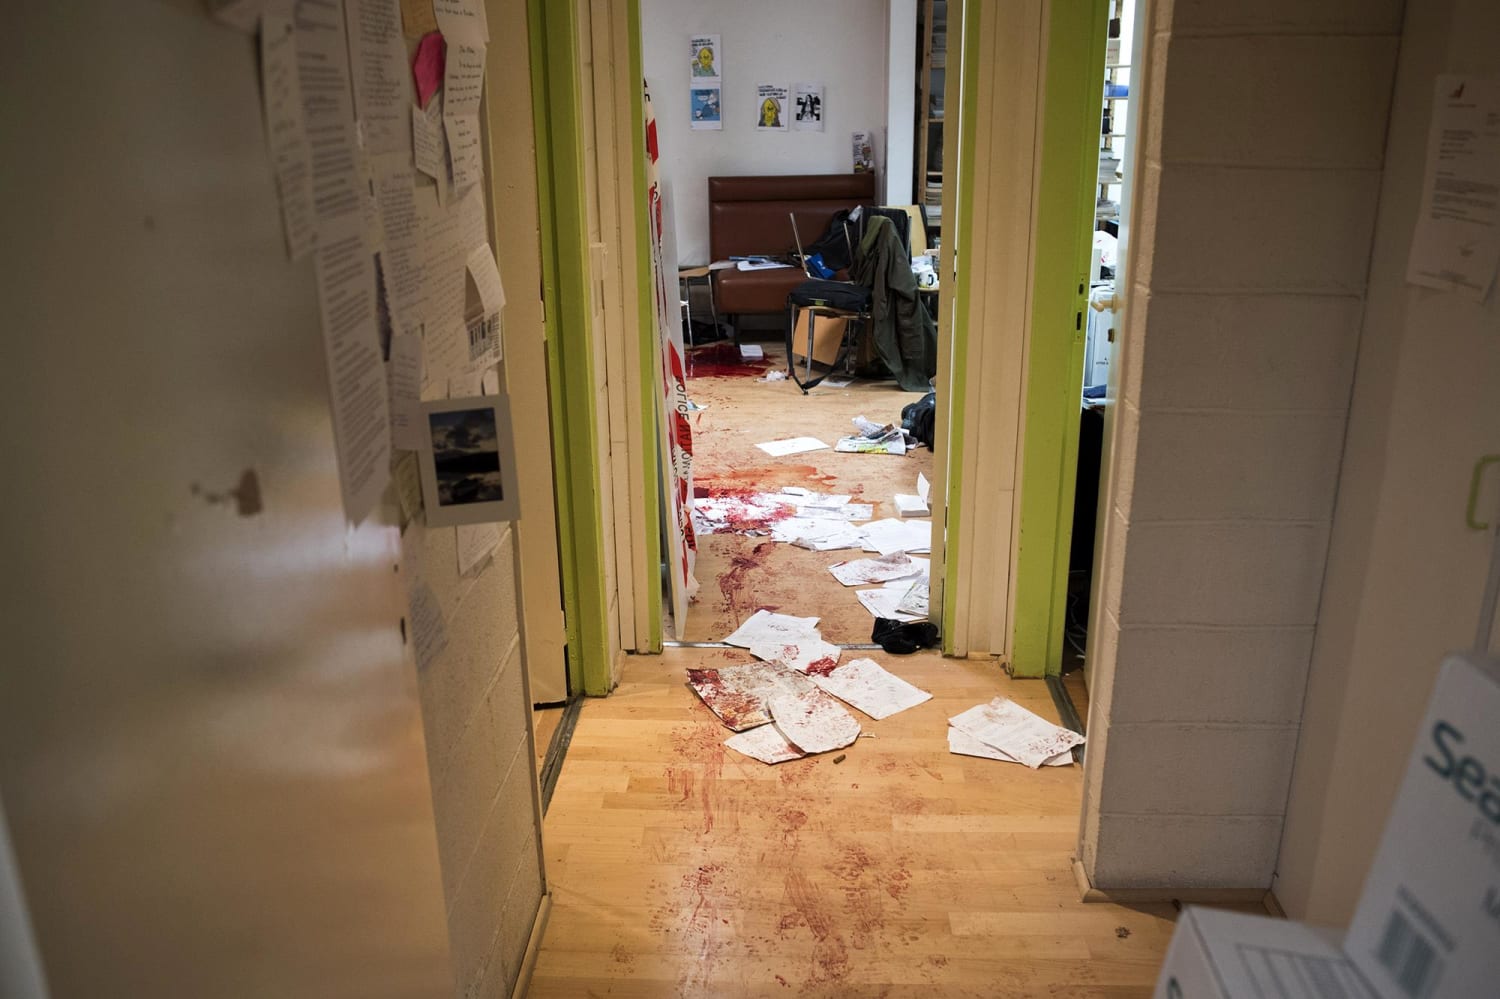 Image Inside Charlie Hebdo Office Reveals Bloody Aftermath of Paris Attack